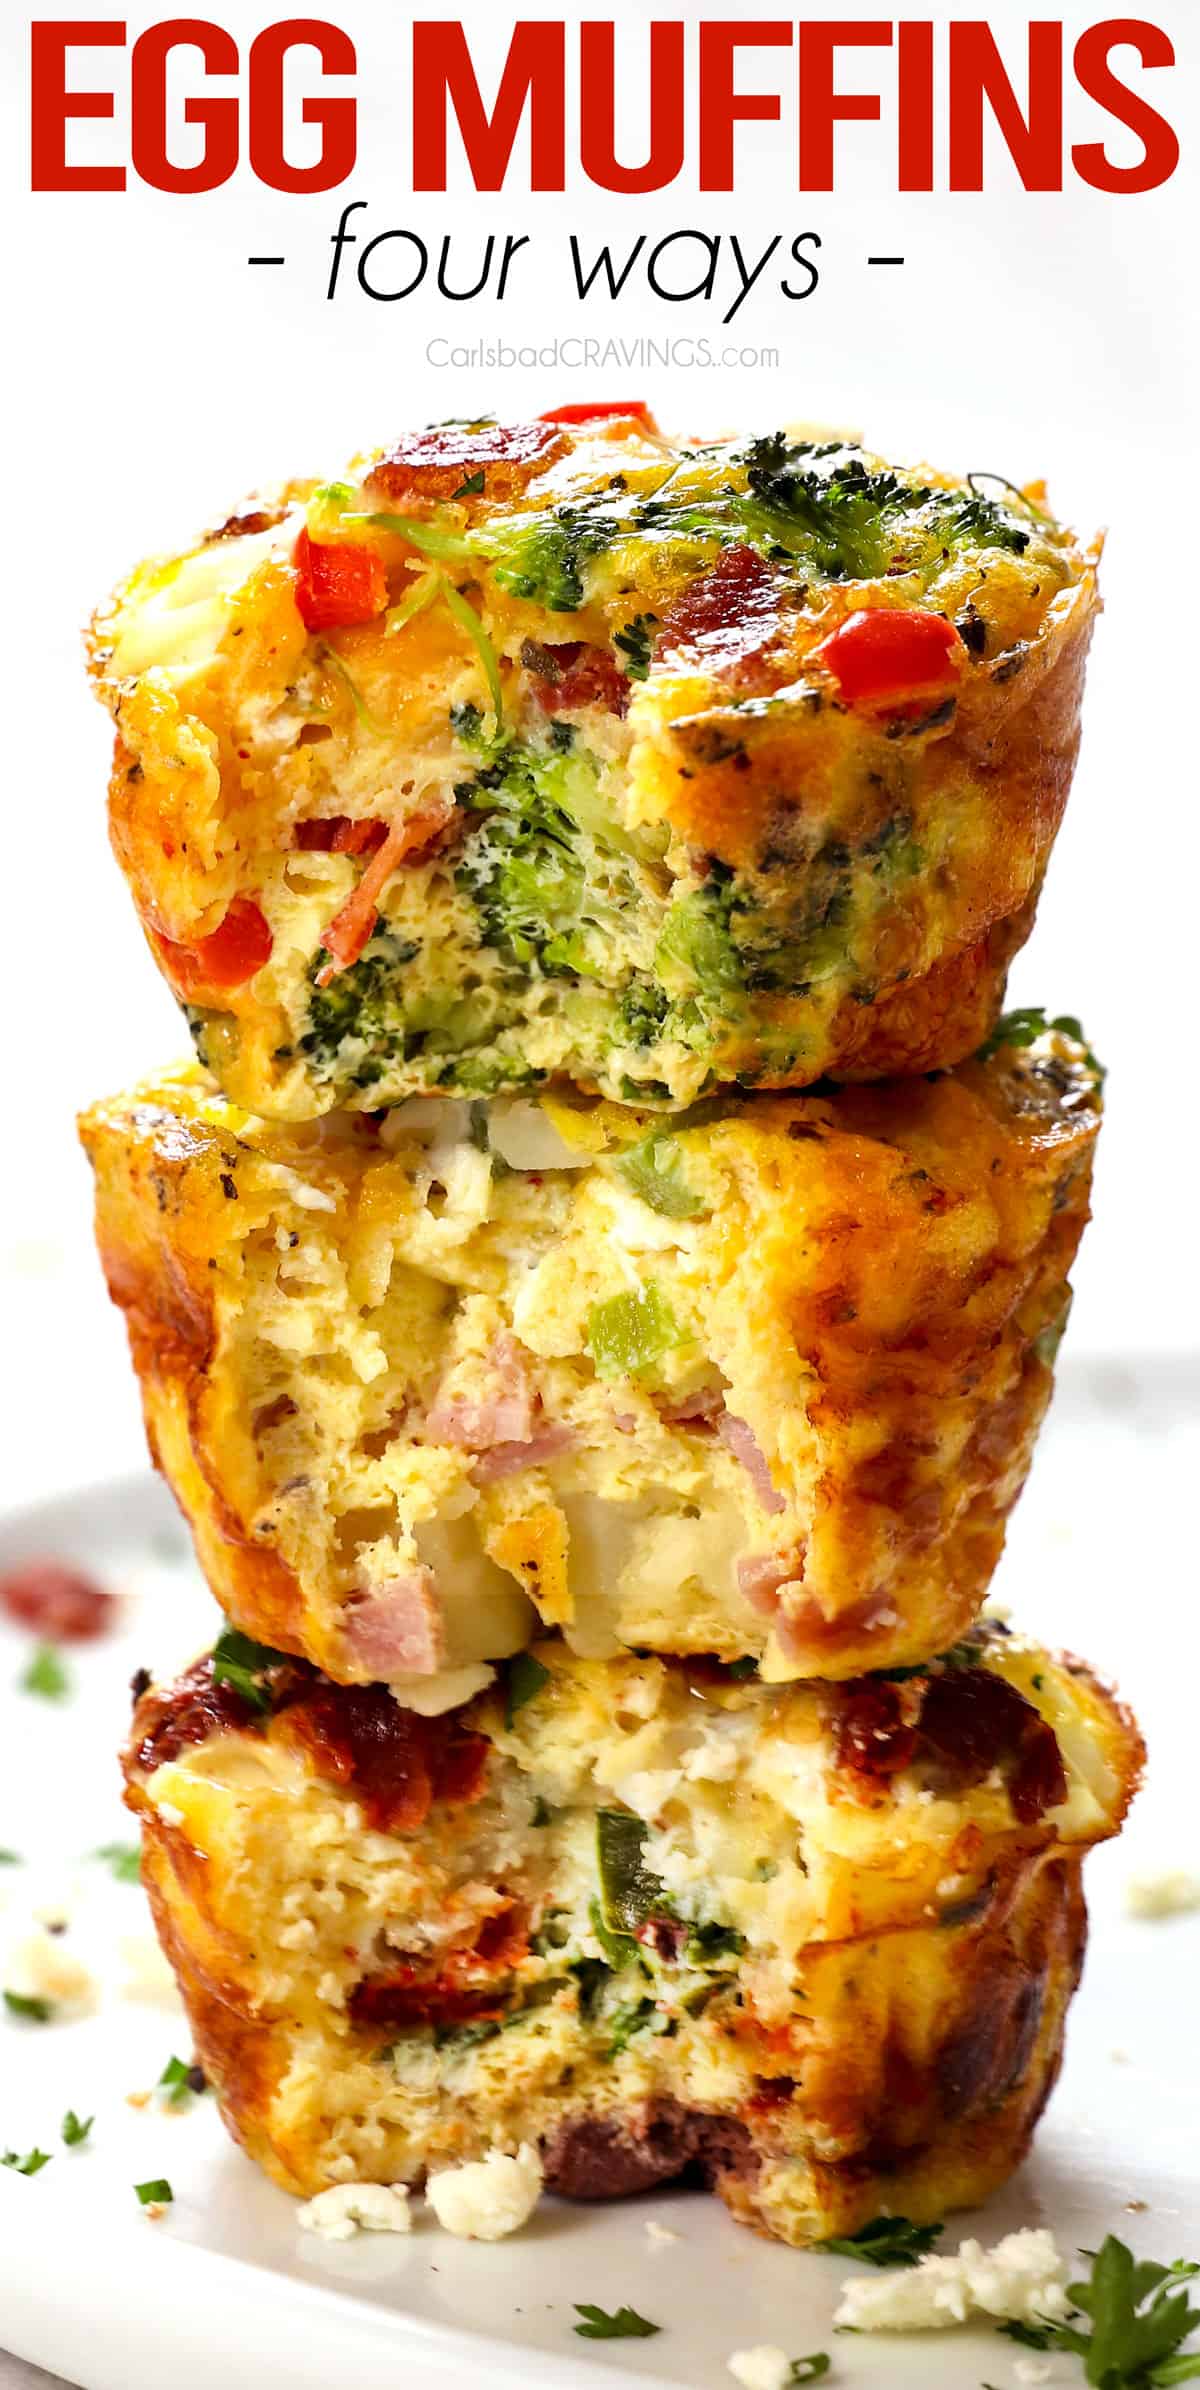 egg muffins with bites taken out stacked showing the add-ins